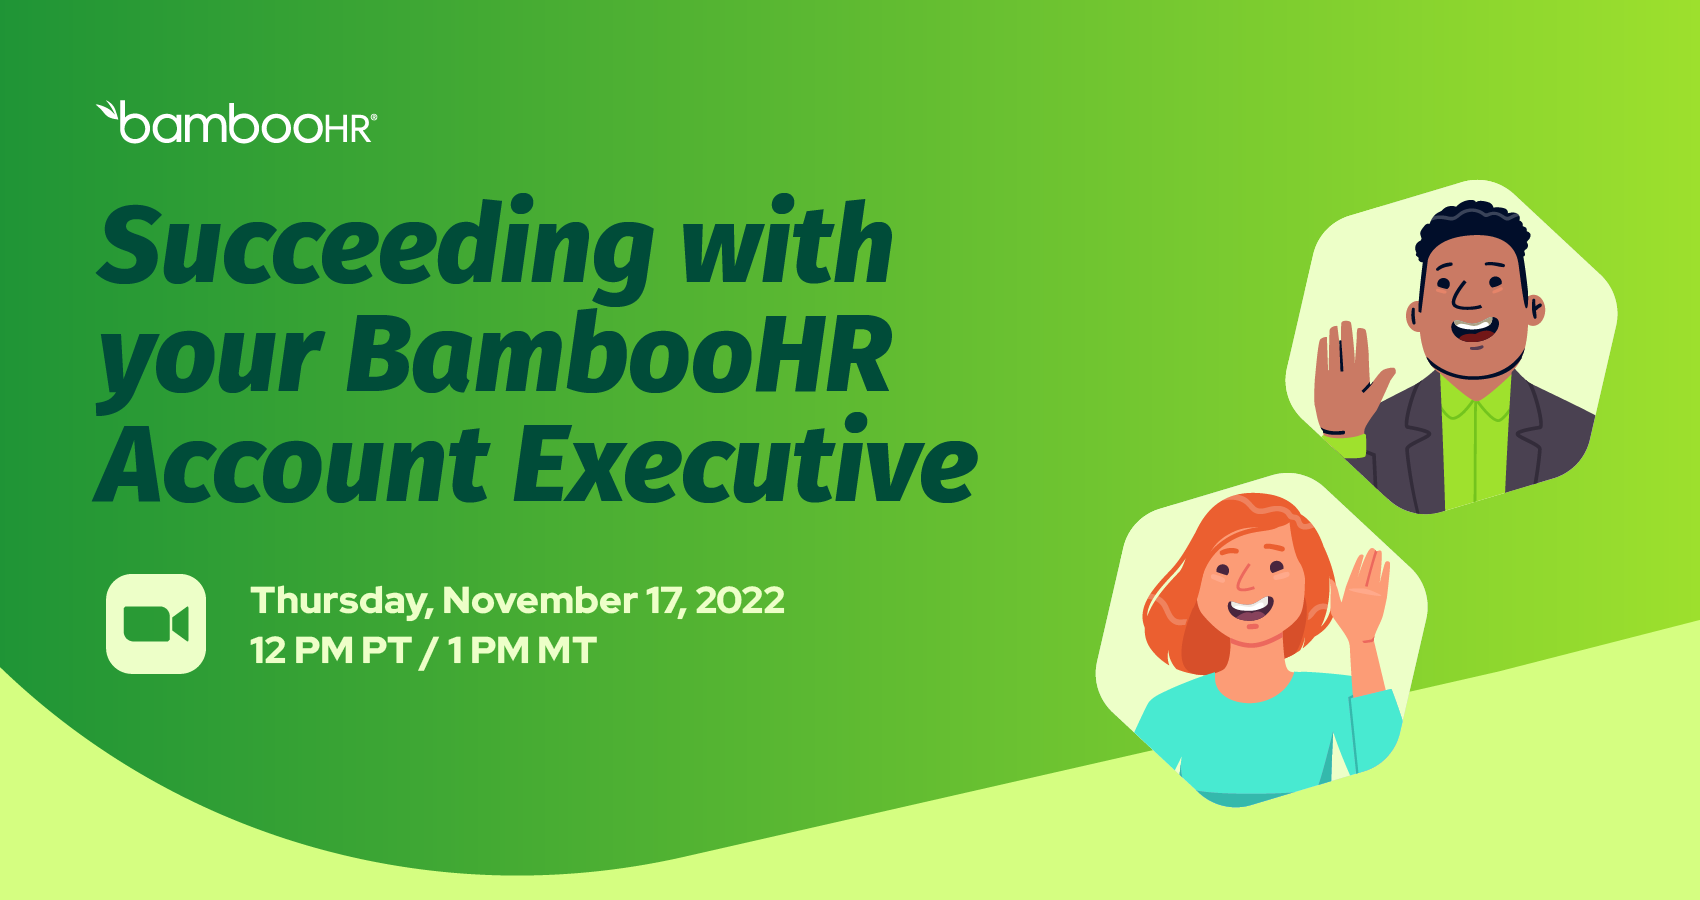  Succeeding with your BambooHR Account Executive